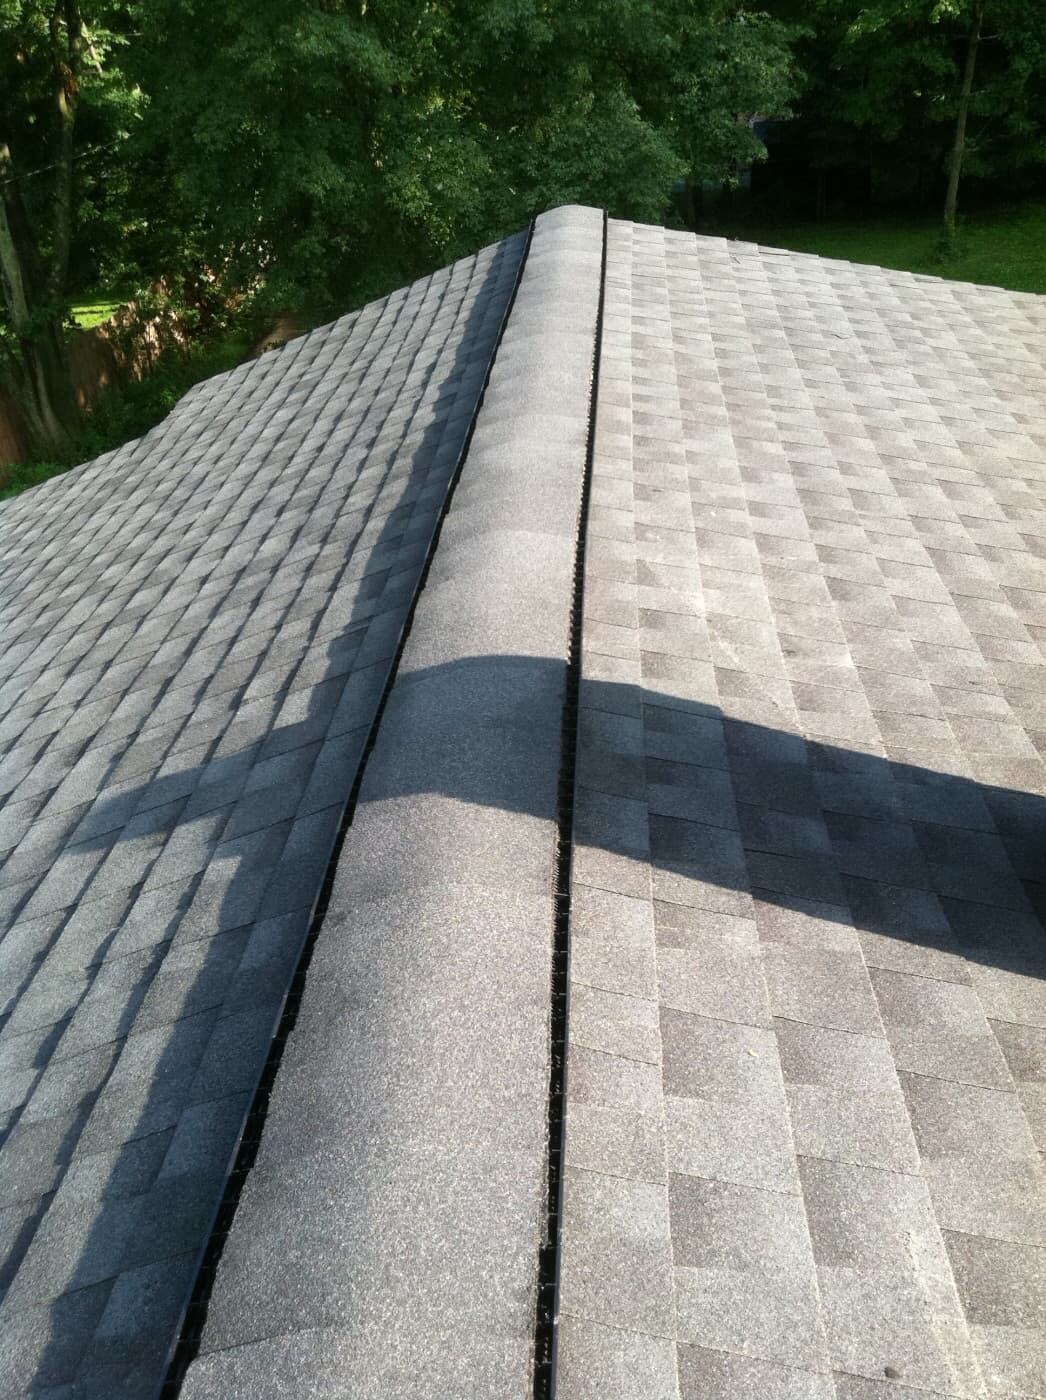 Quality roofing at a price you can afford